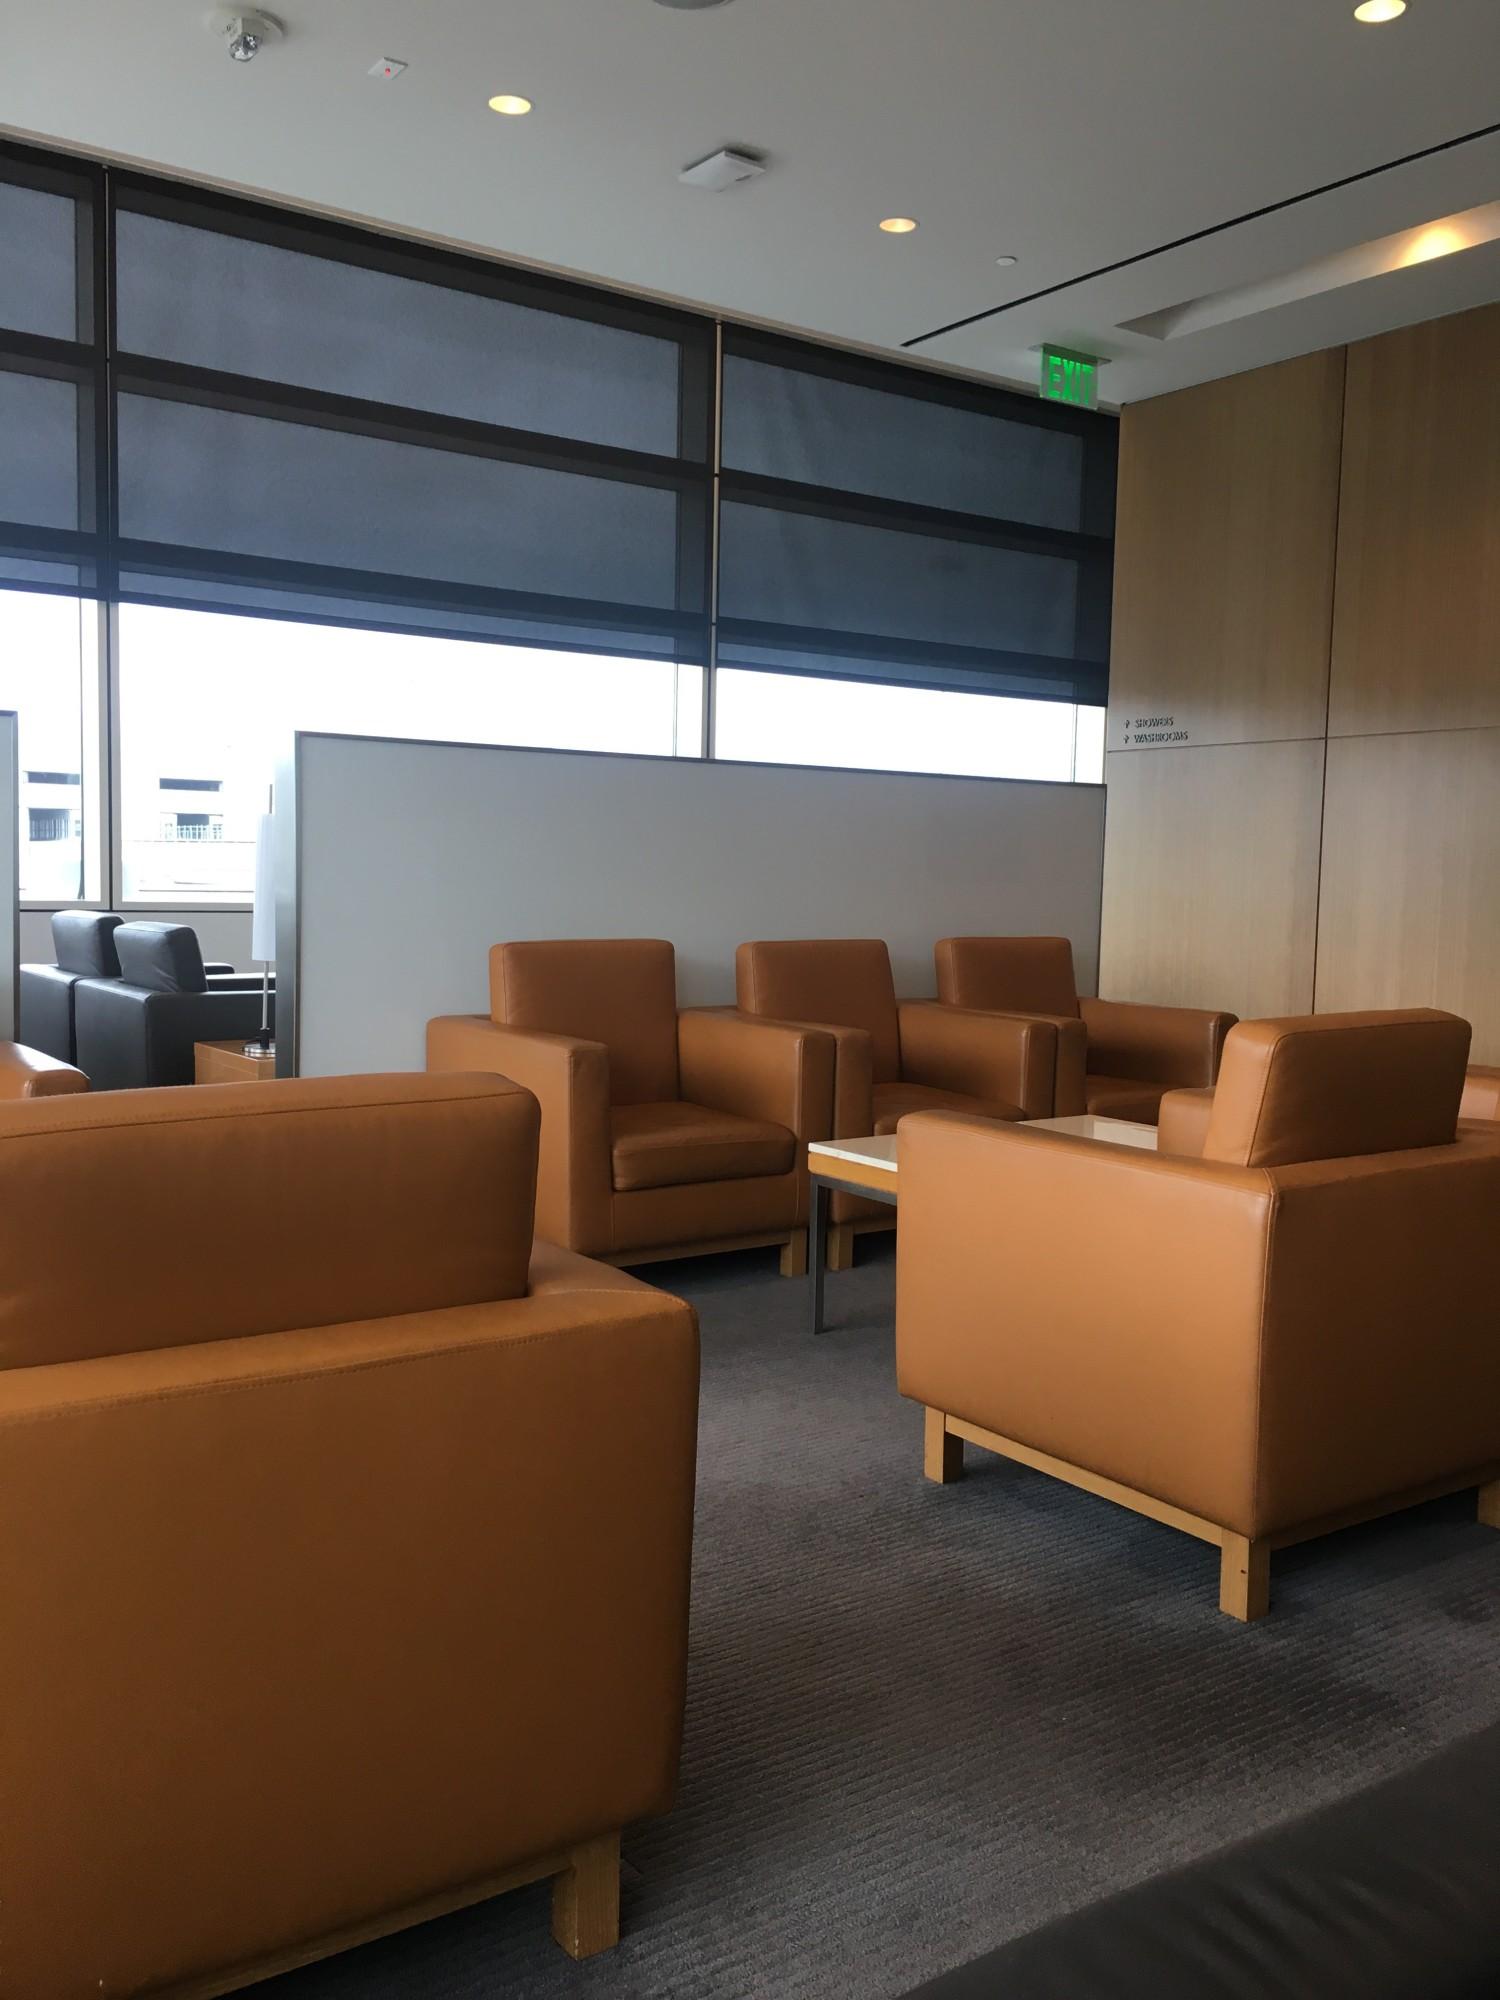 Cathay Pacific First and Business Class Lounge image 71 of 74